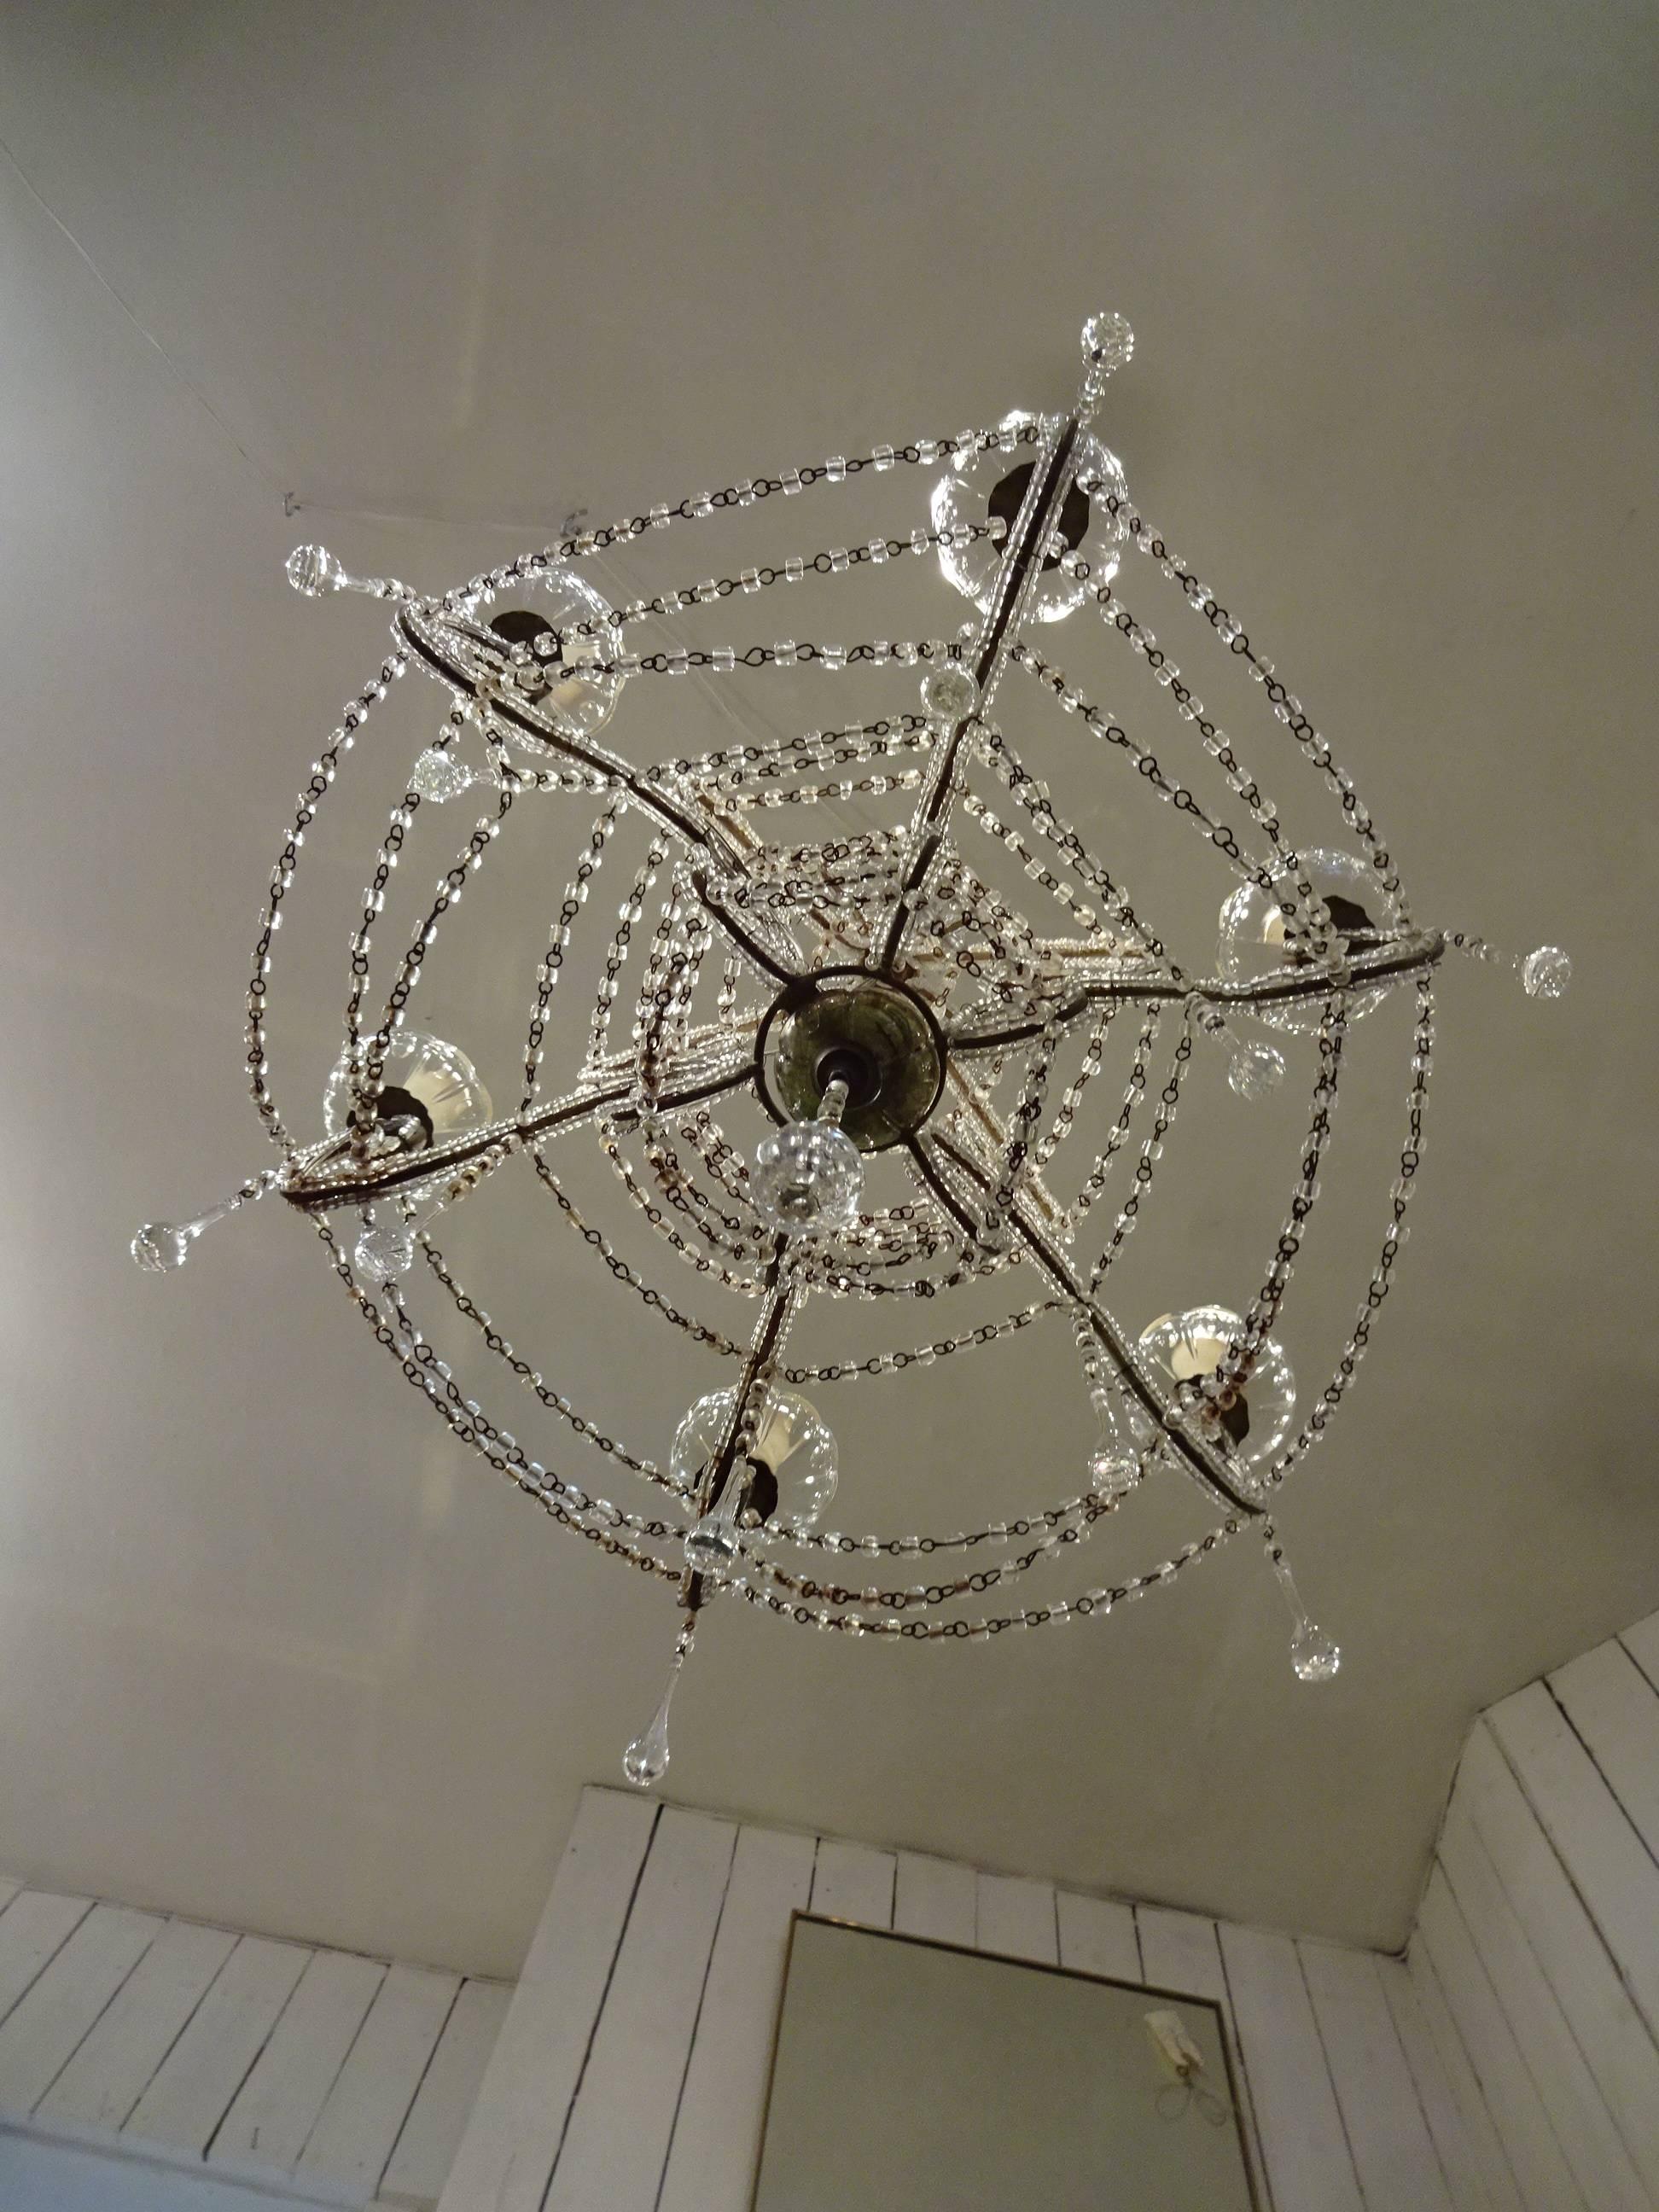 Other Early 20th Century French Chandelier